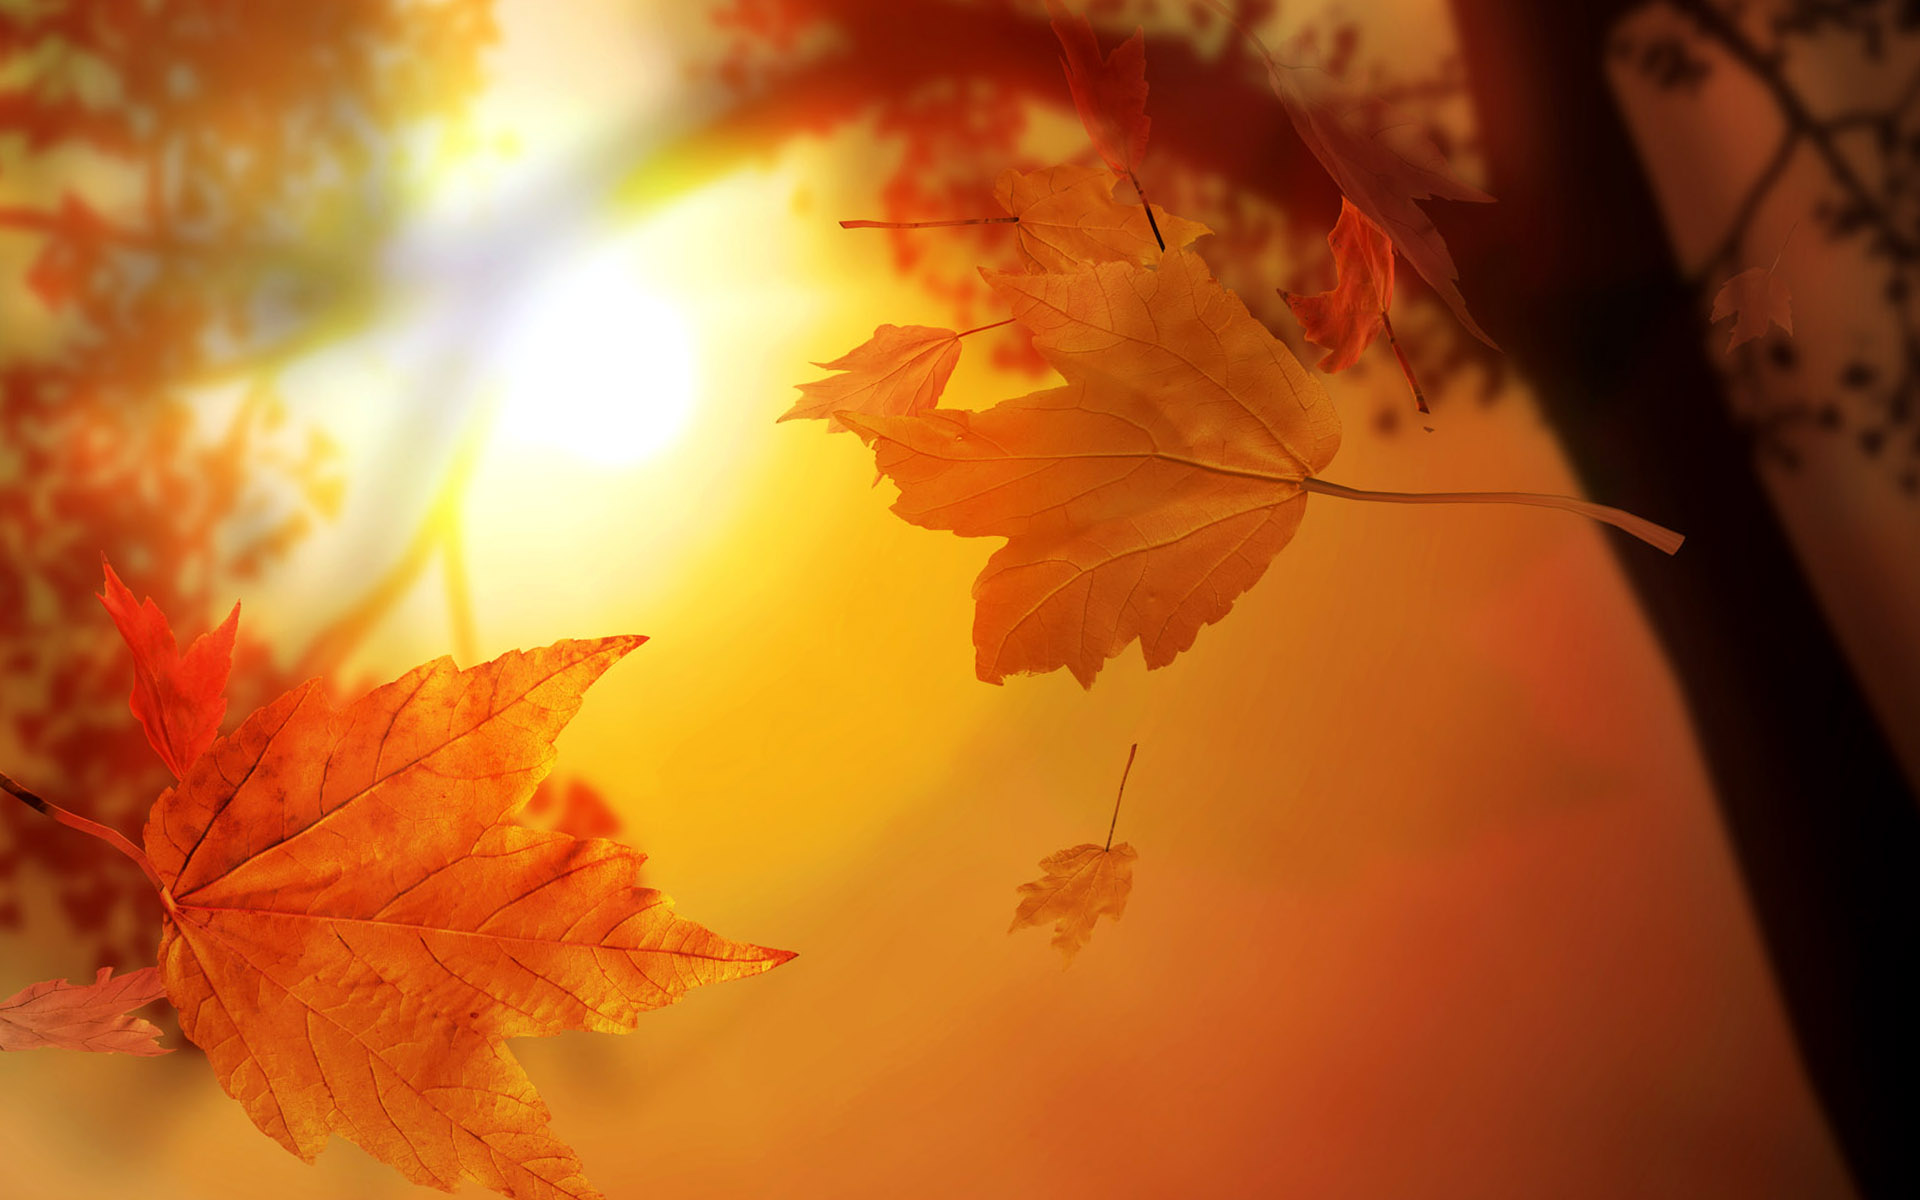 Sun And Autumn Leaves Landscape Photograpy Wallpaper